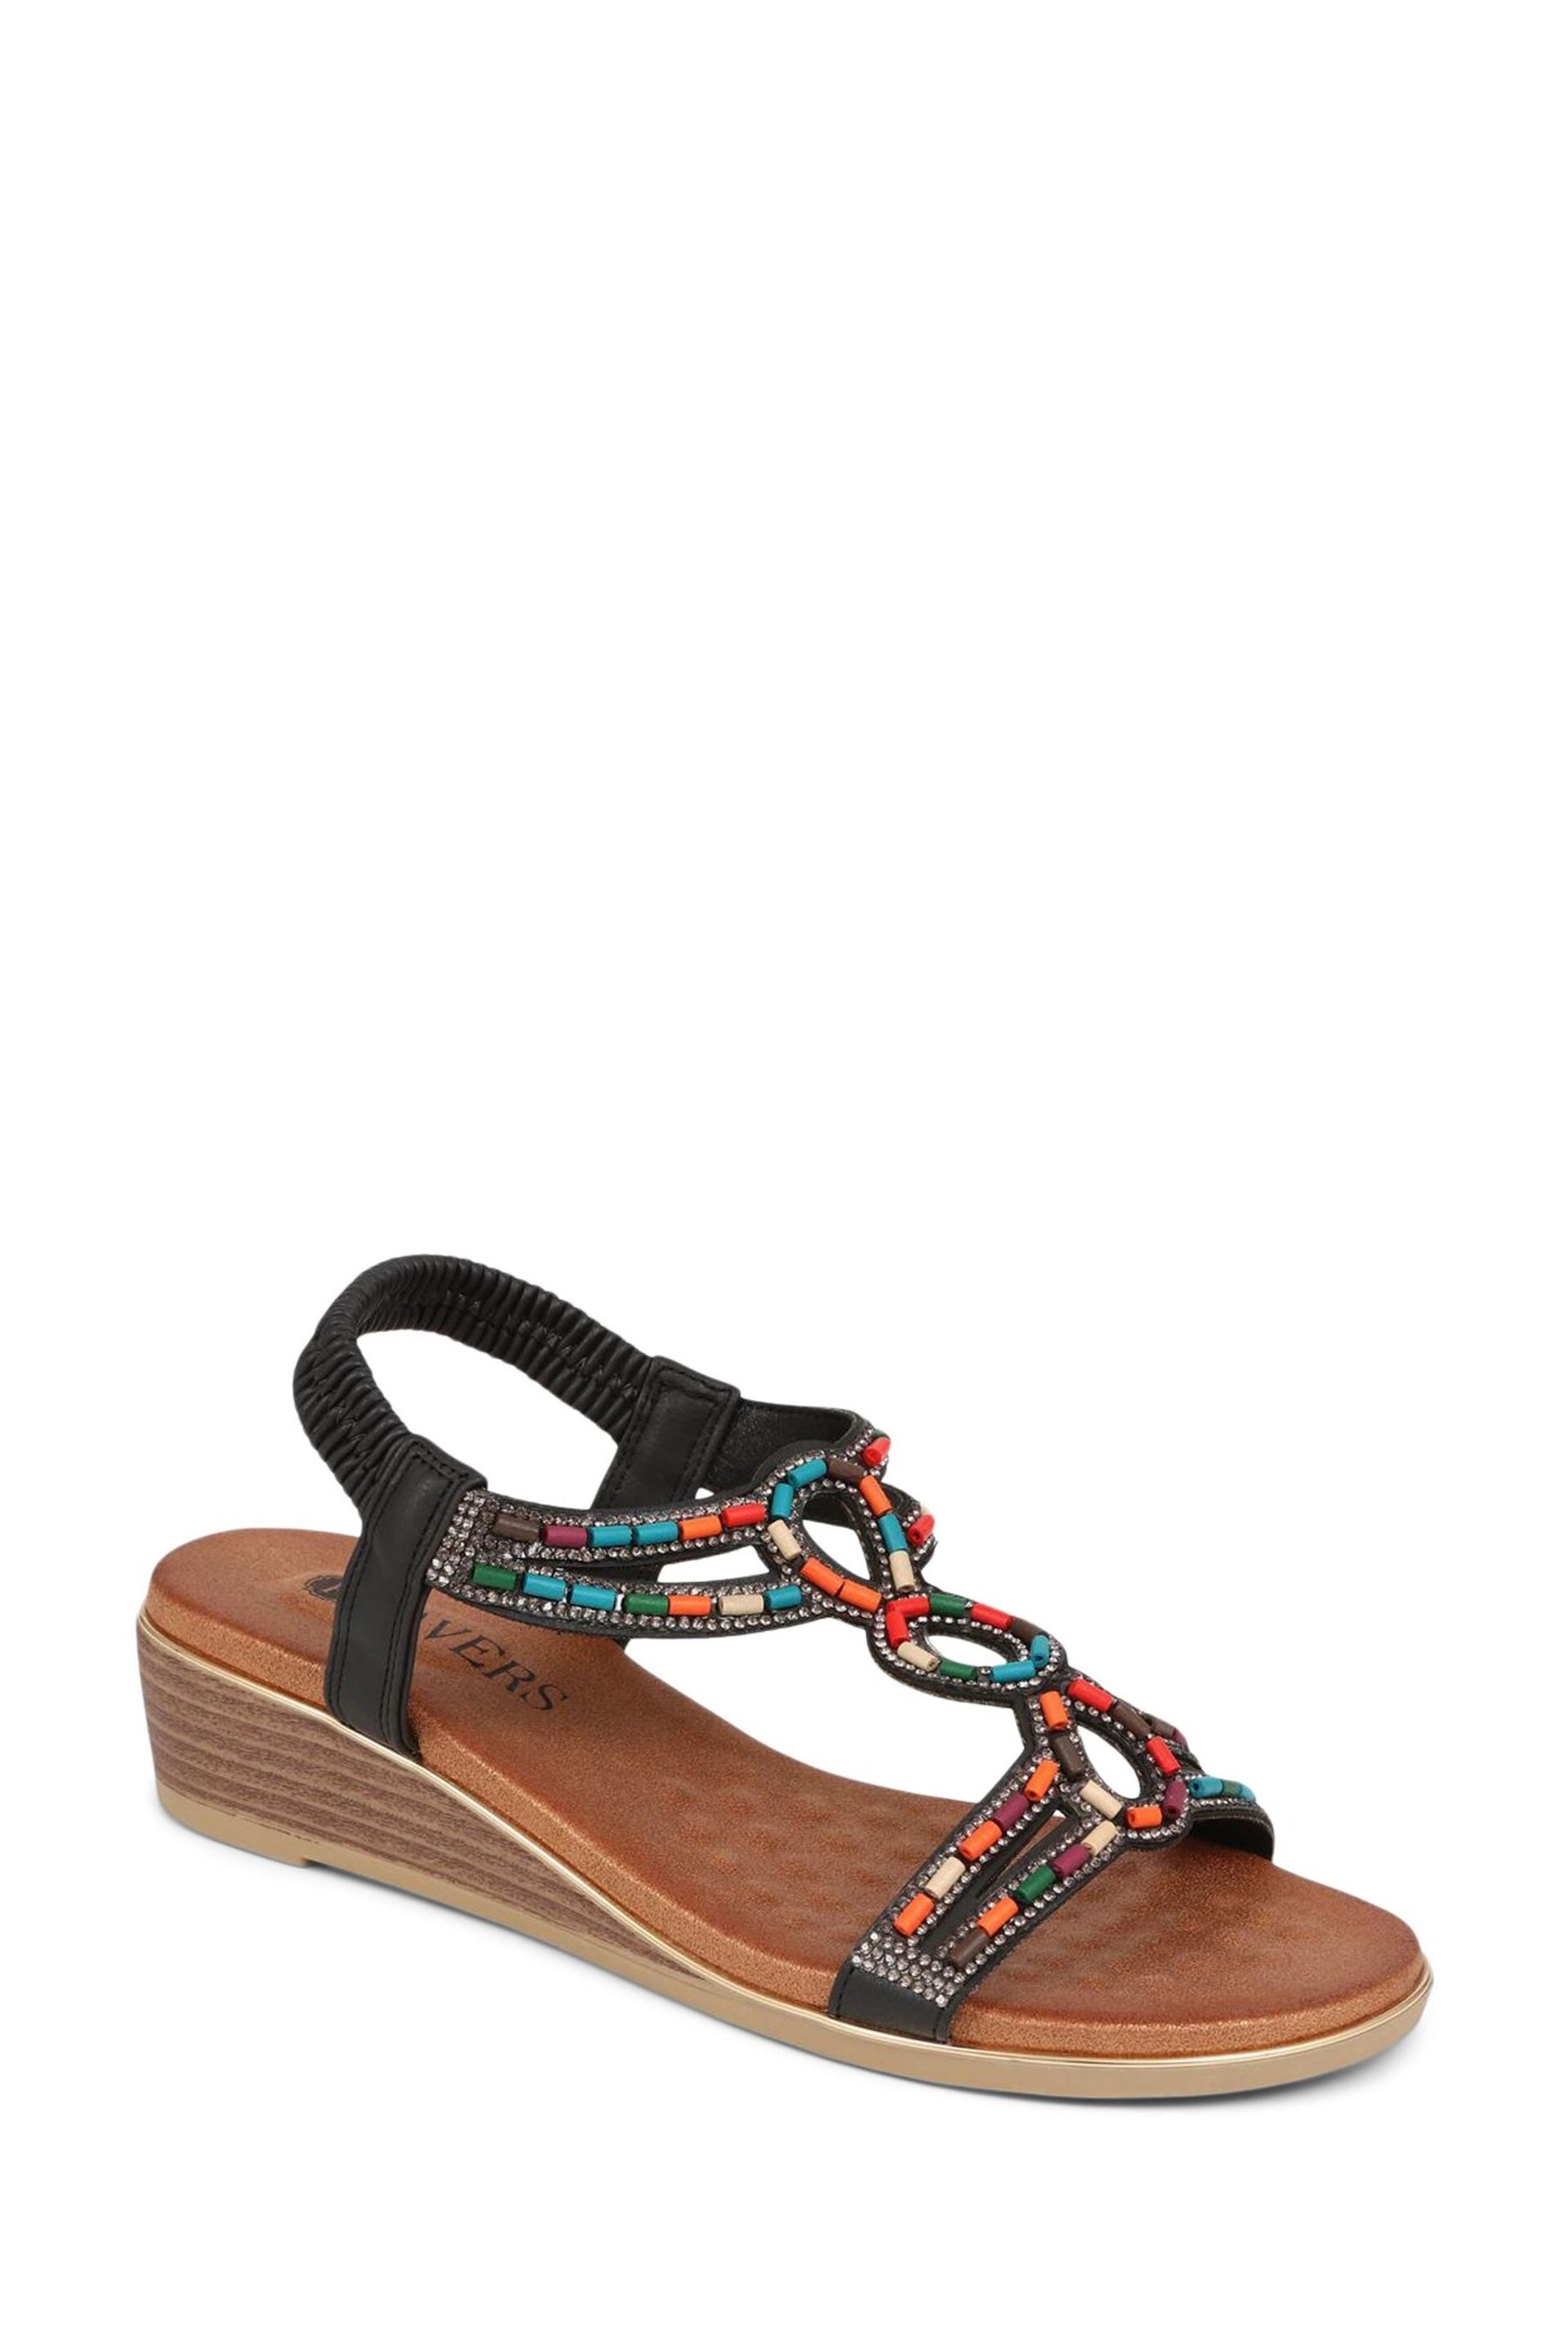 Pavers Beaded Sandals - Image 2 of 5